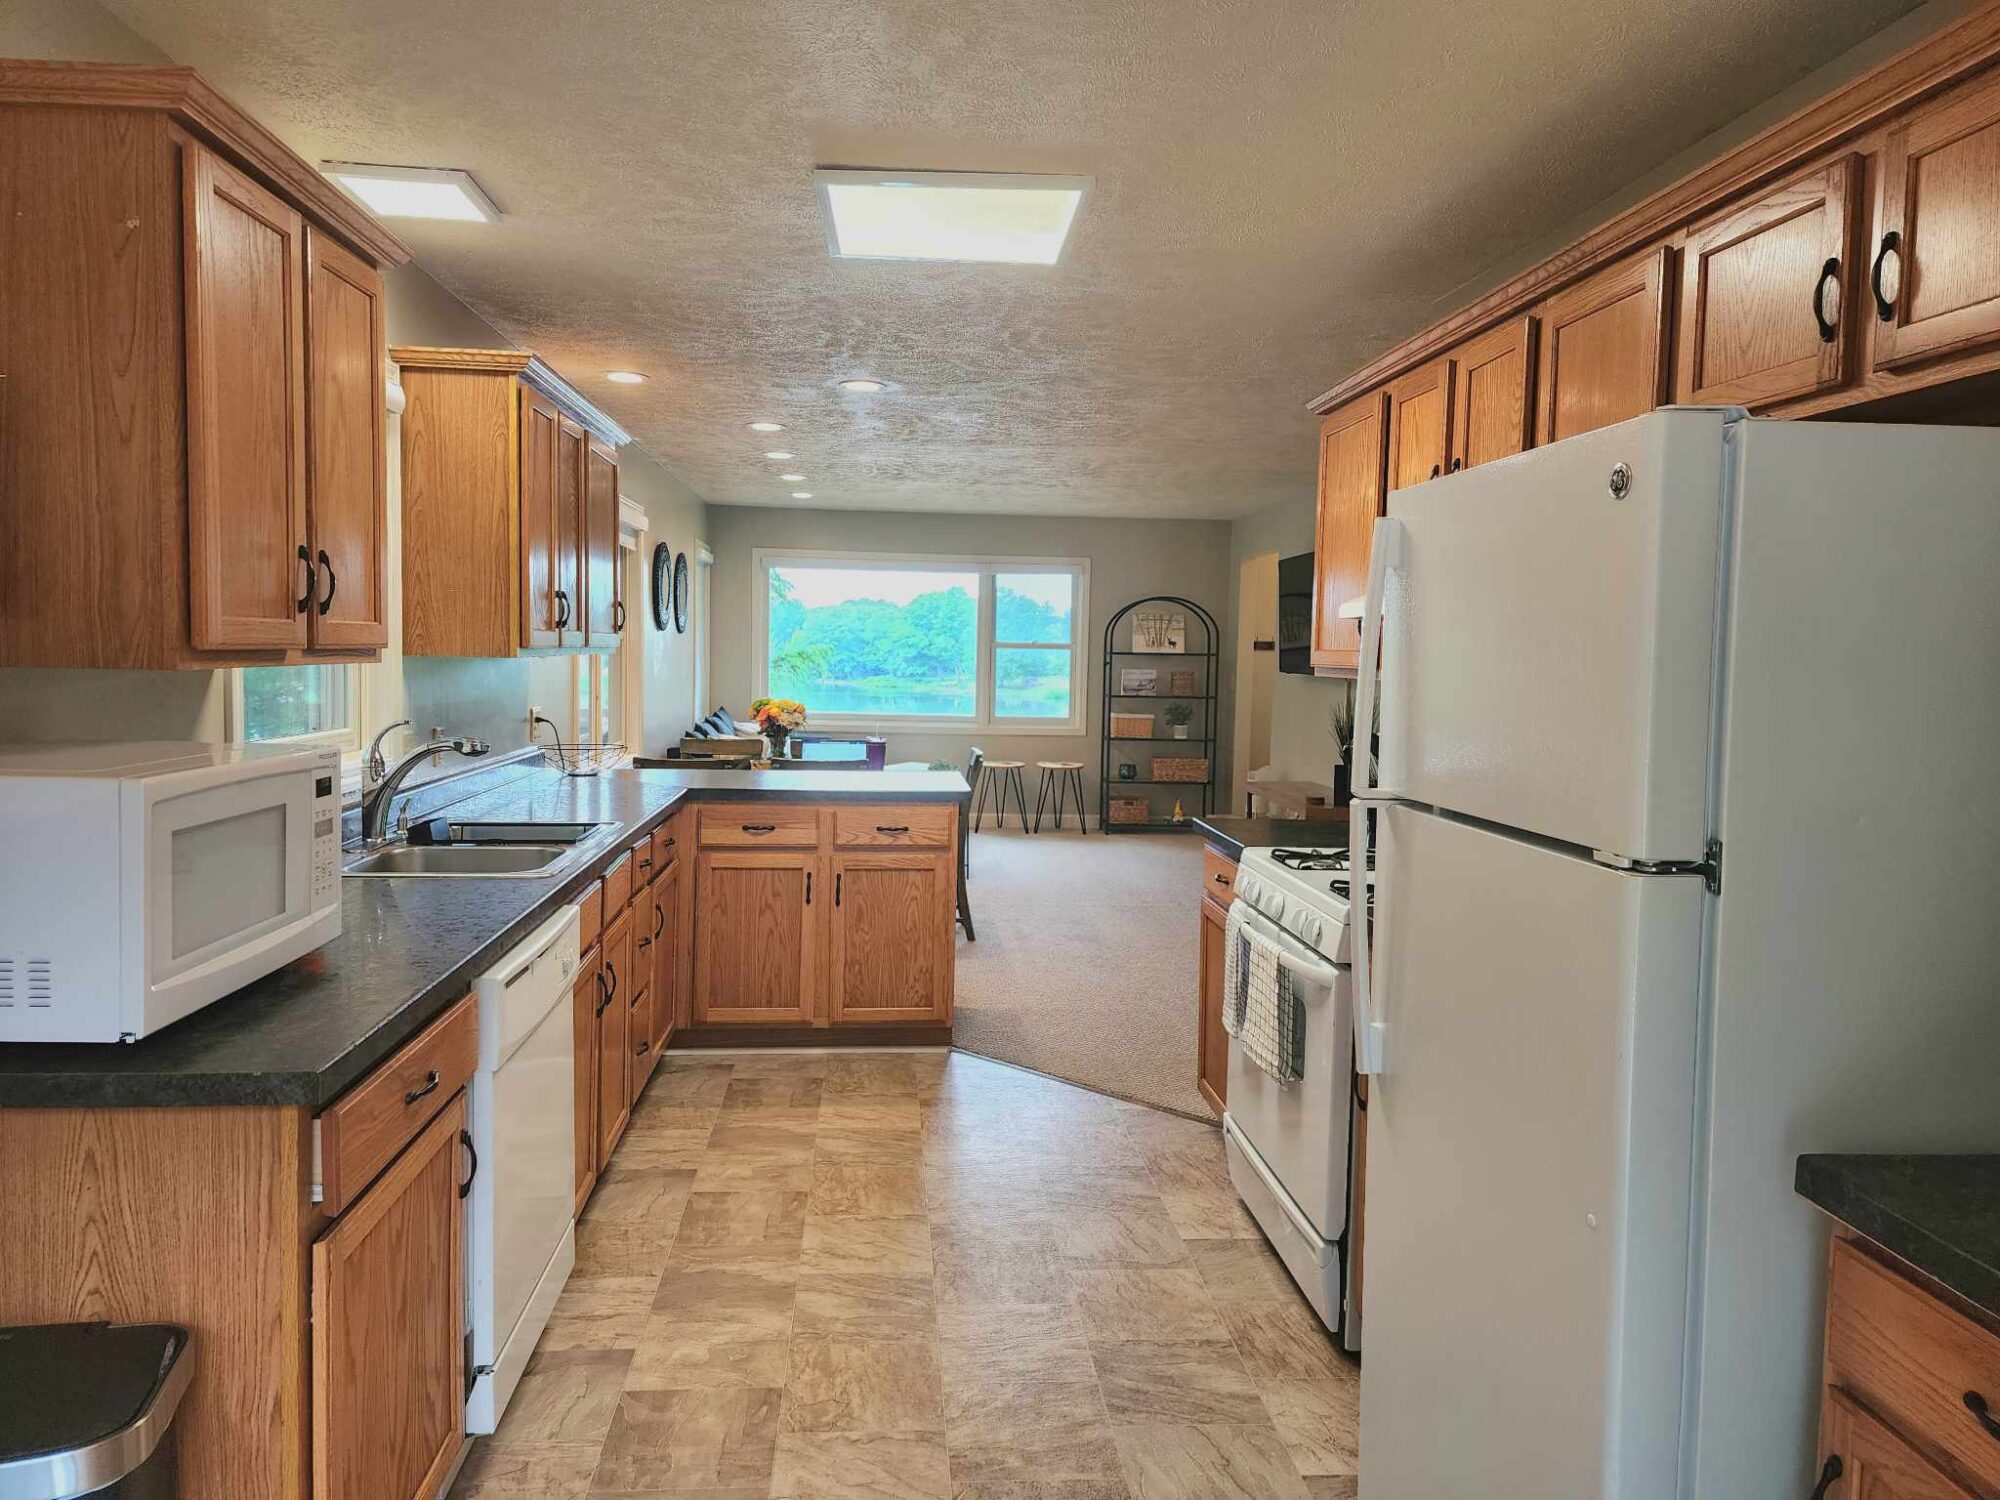 Dyer Lake Vacation Home Kitchen